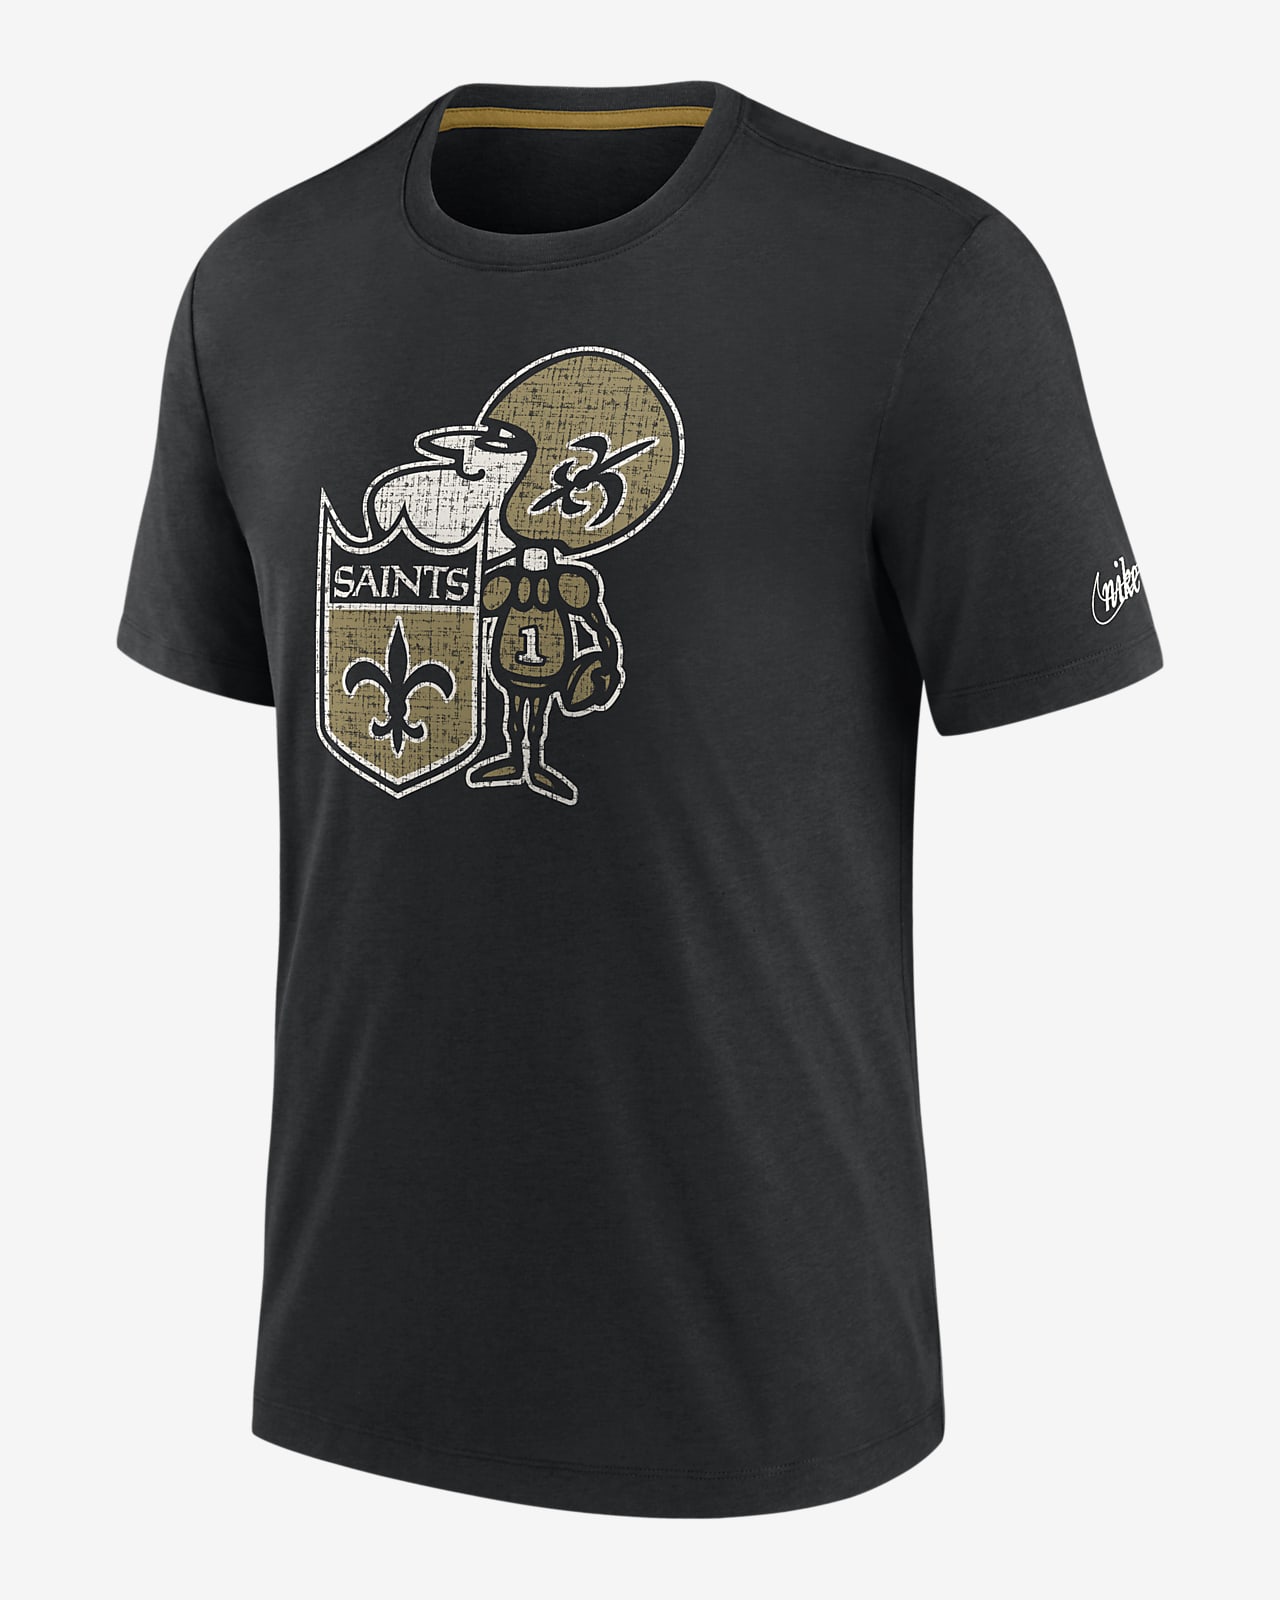 New Orleans Saints Men's Black and Gold Causal T-shirt